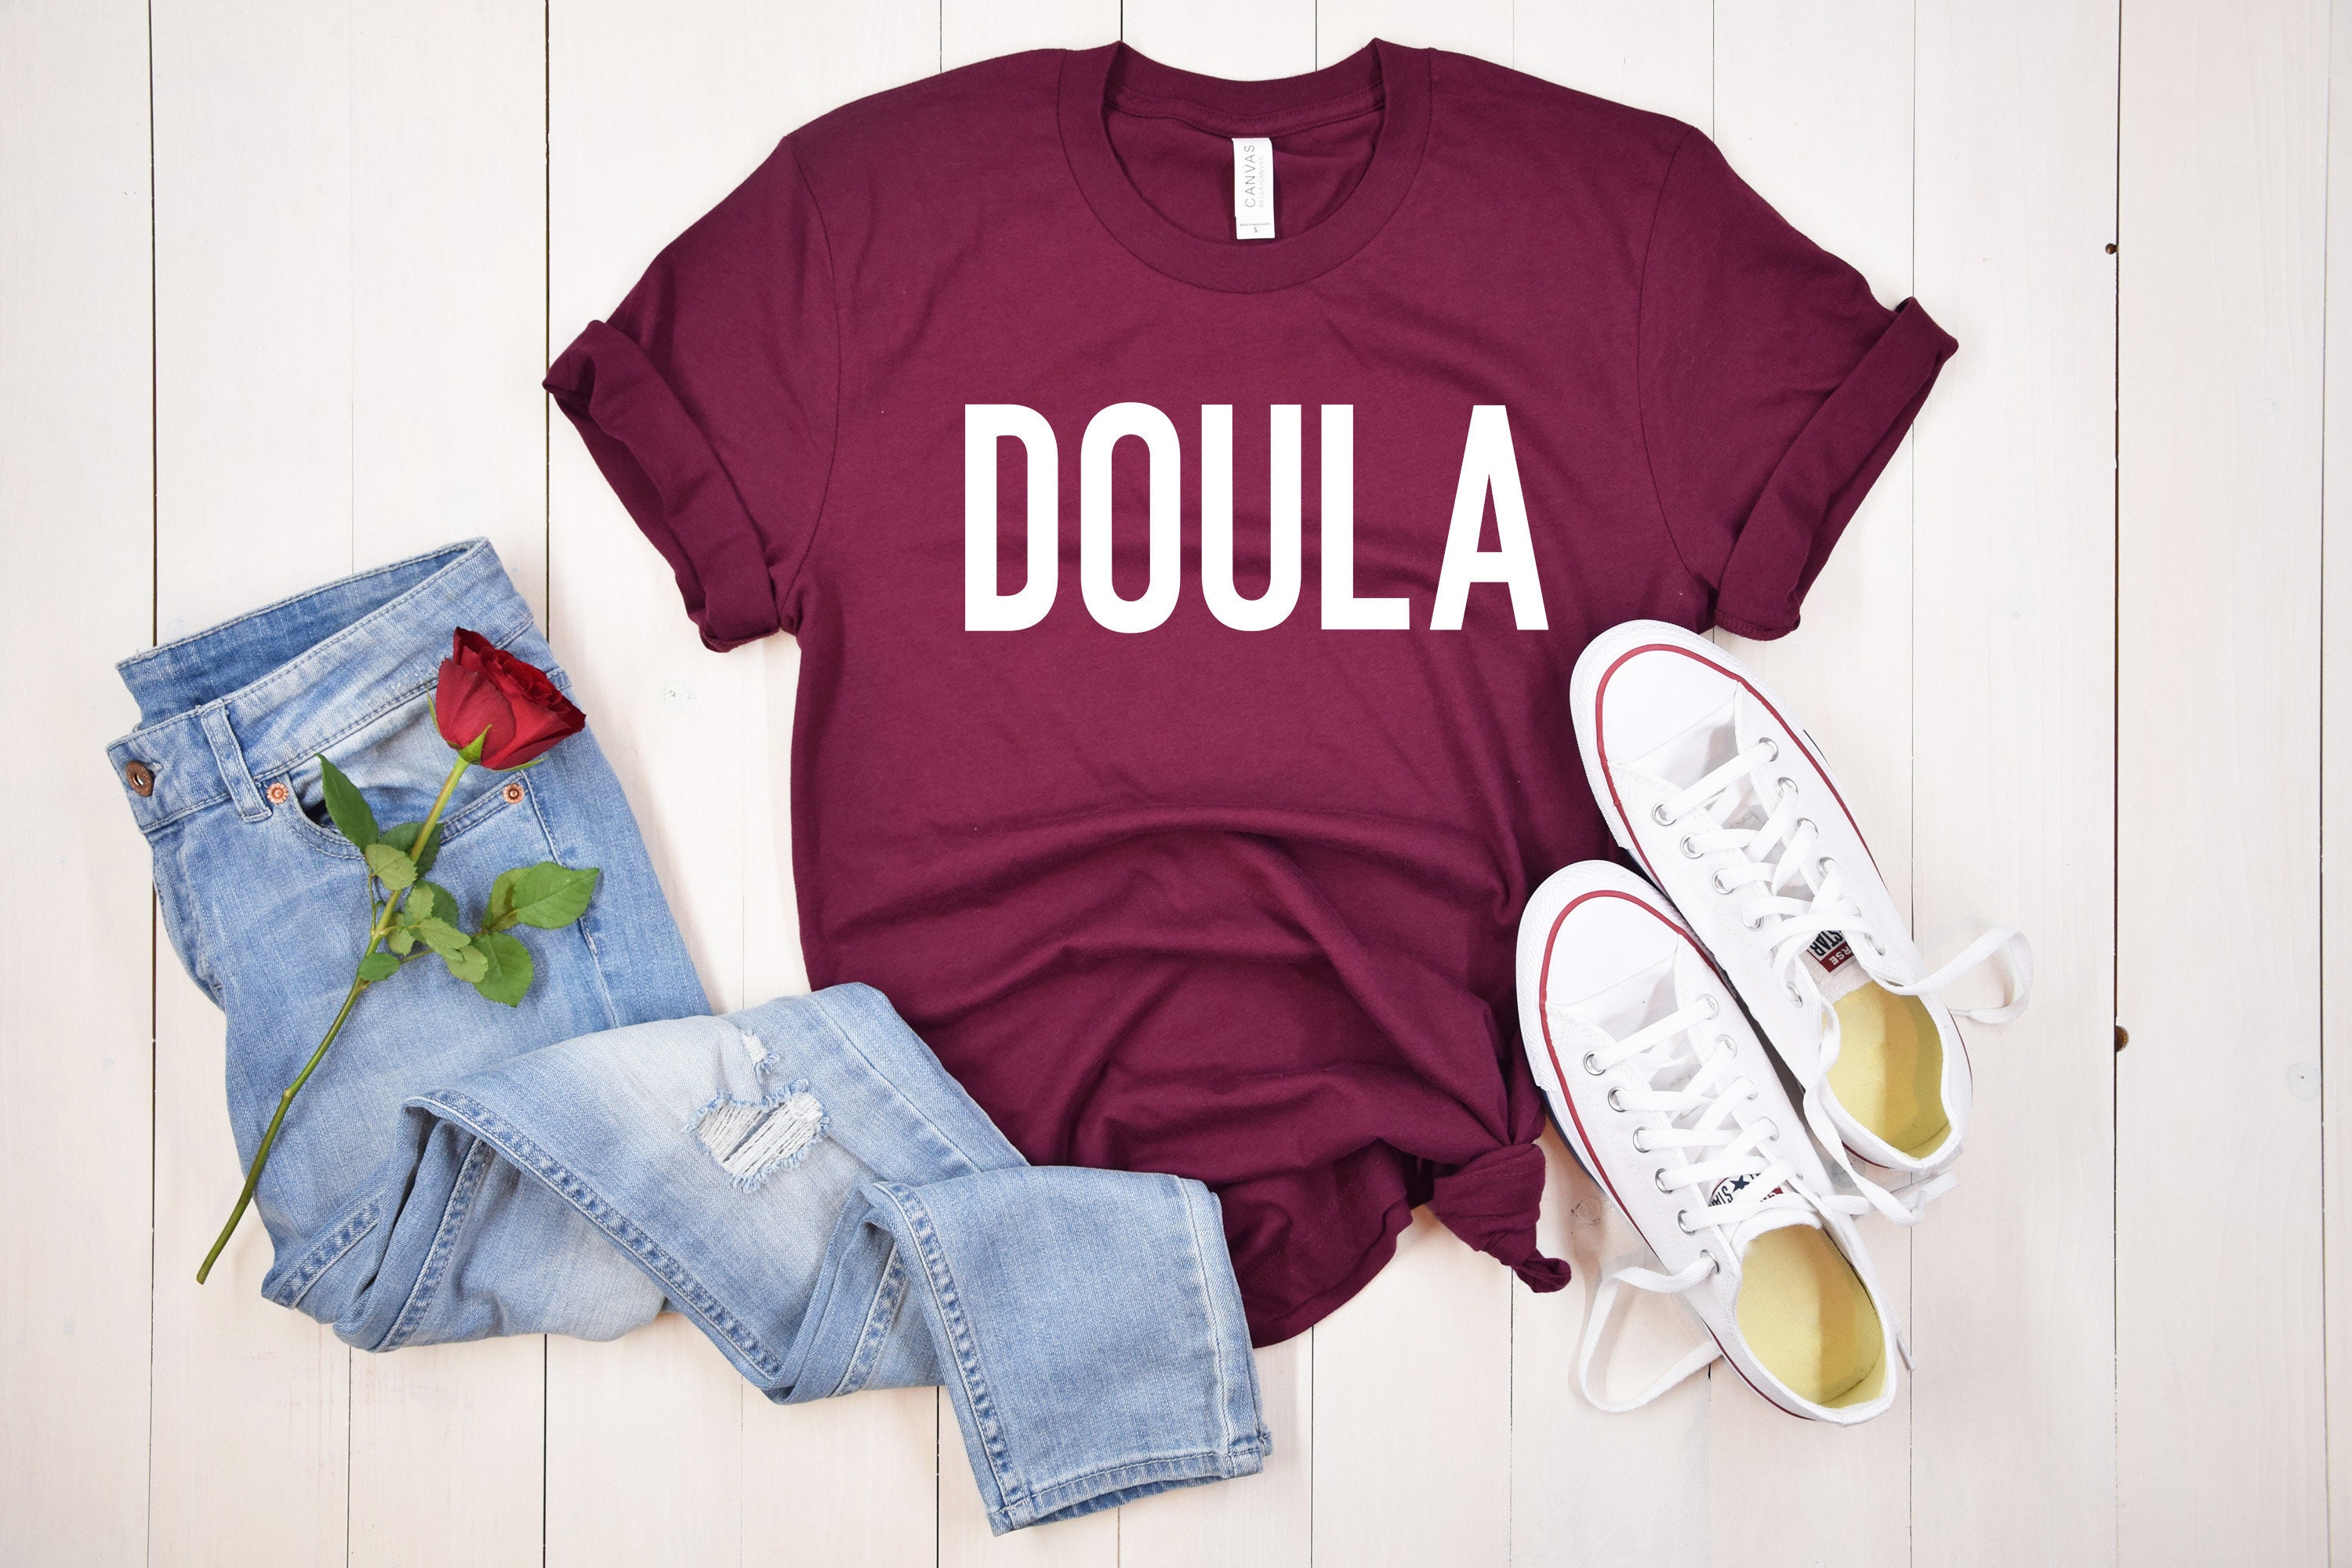 Birth Worker Midwife Student Midwifery Labor And Delivery Cute Doula Shirt Doula Birth T Shirt Proud Doula,Nurse Gift